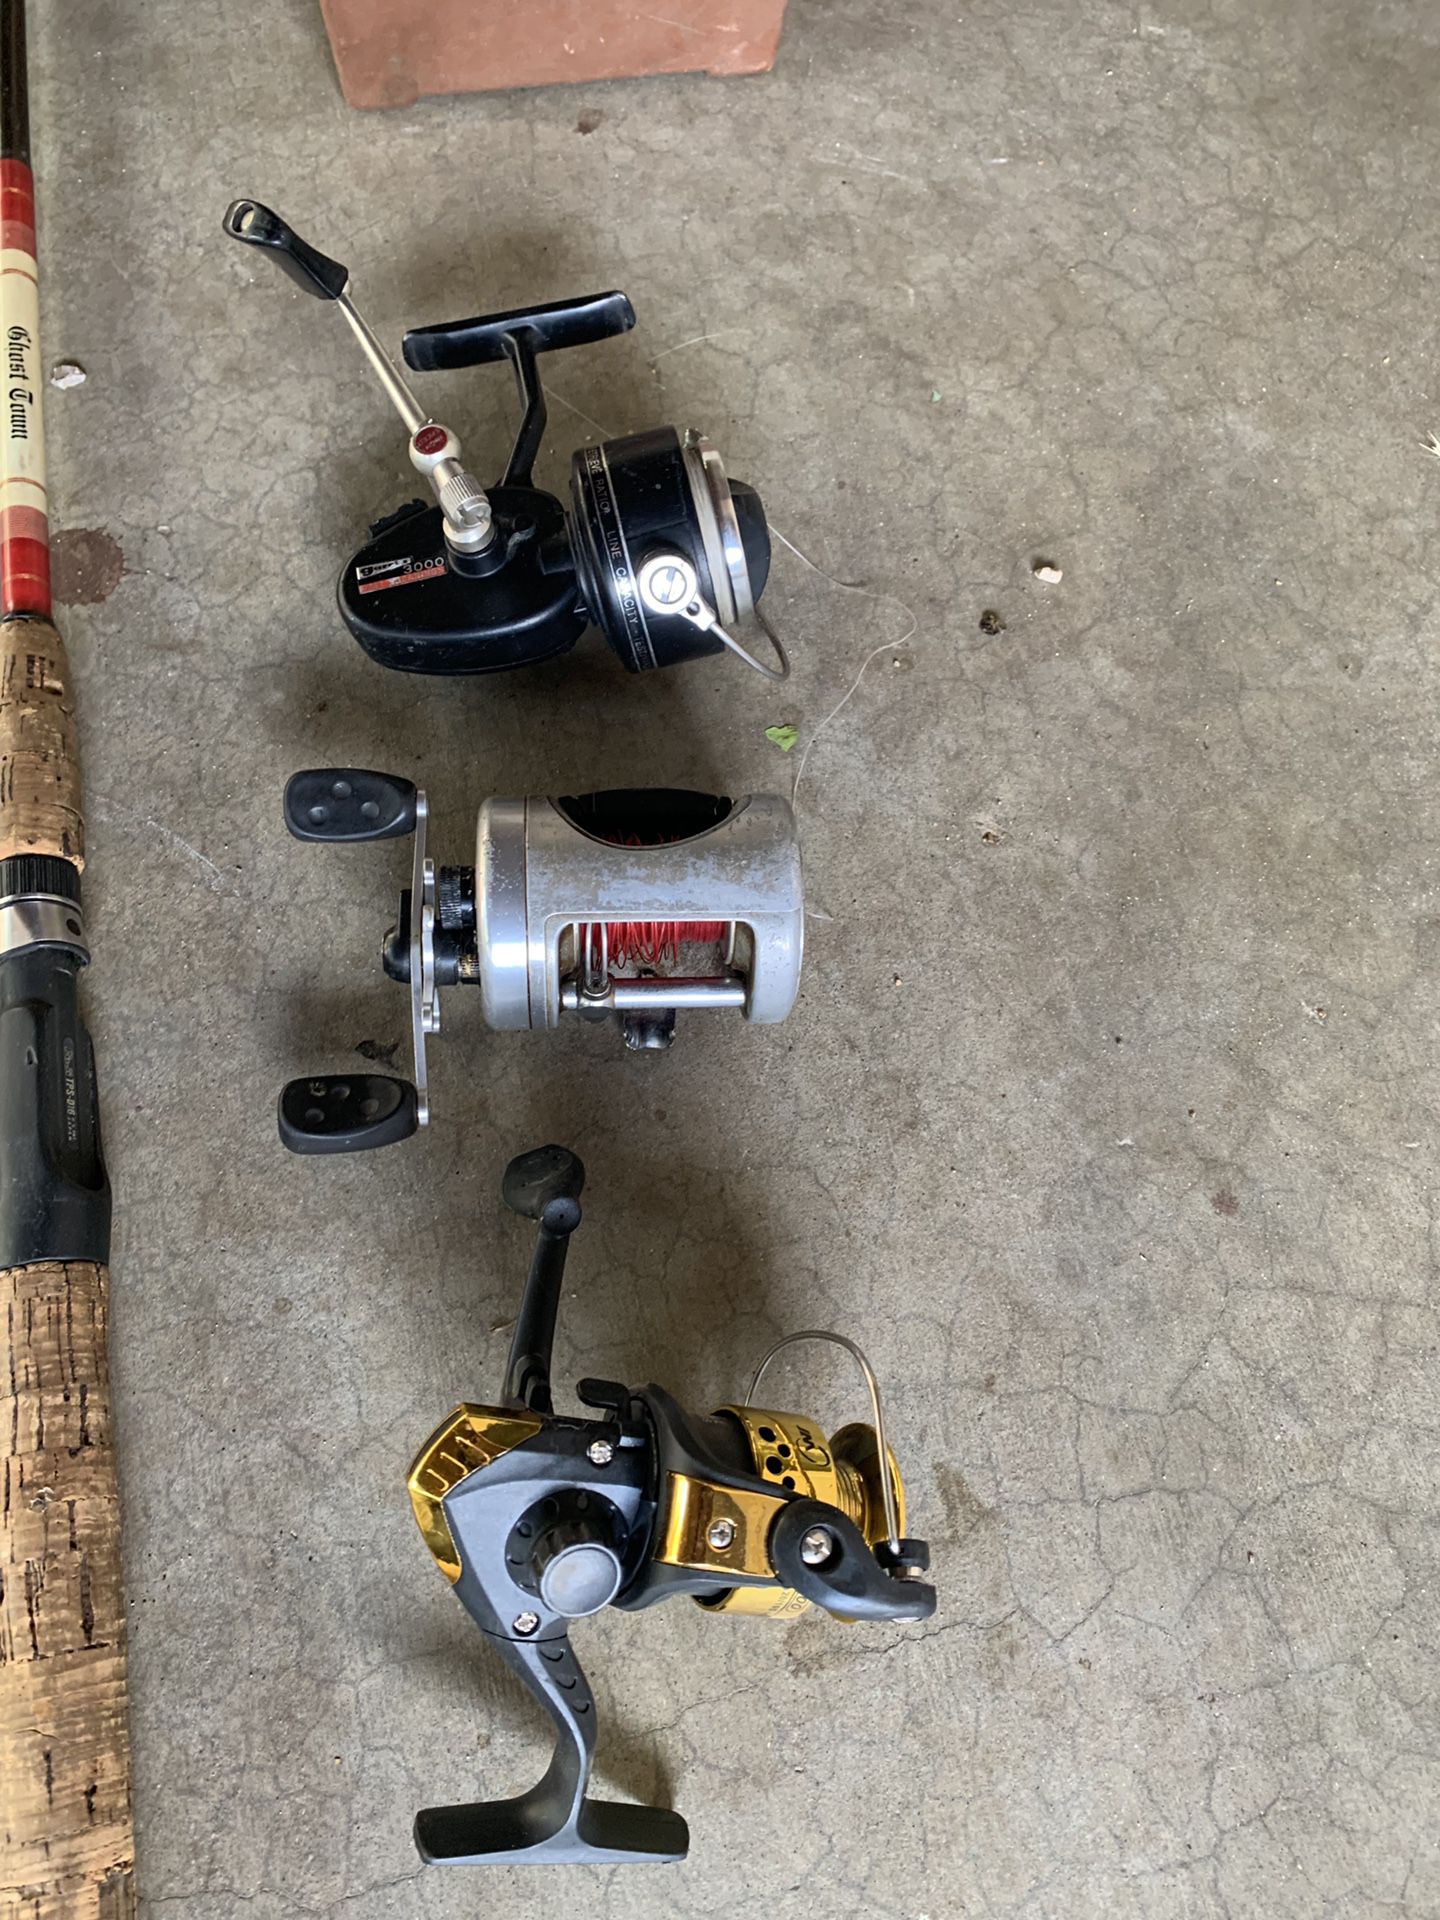 Fishing pole and reels combo $60